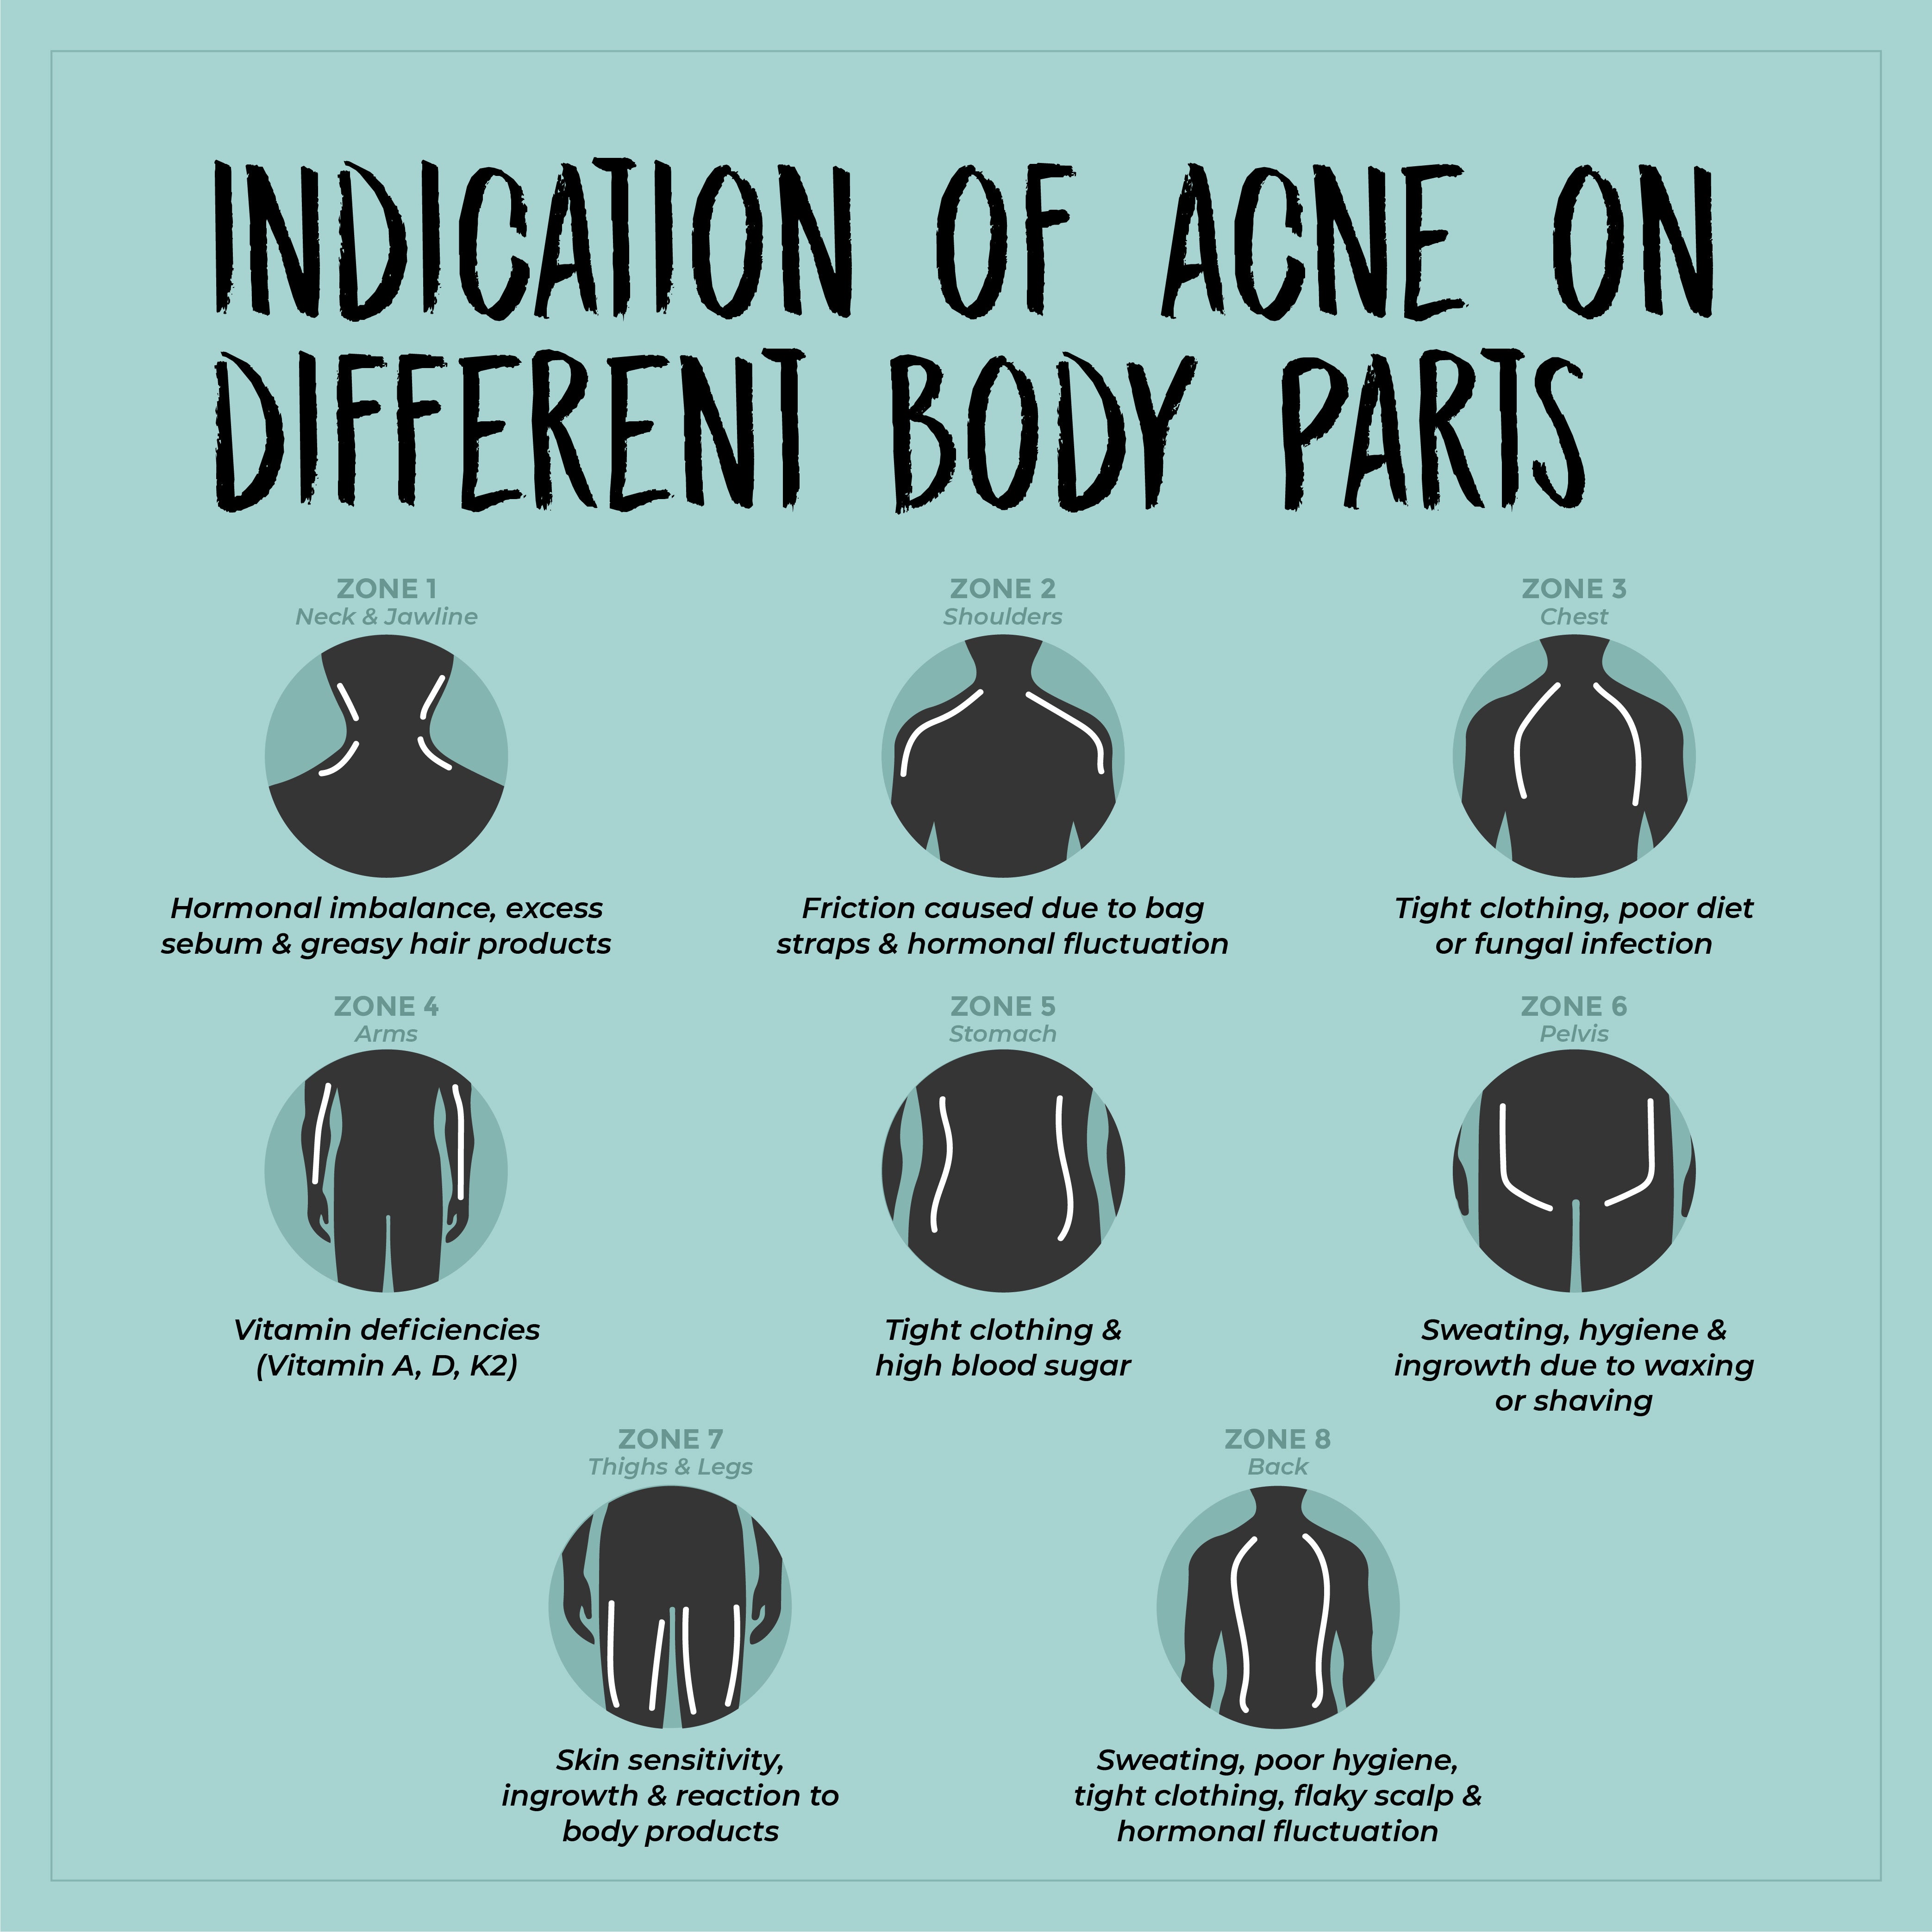 This is an image of indication of acne on different body parts